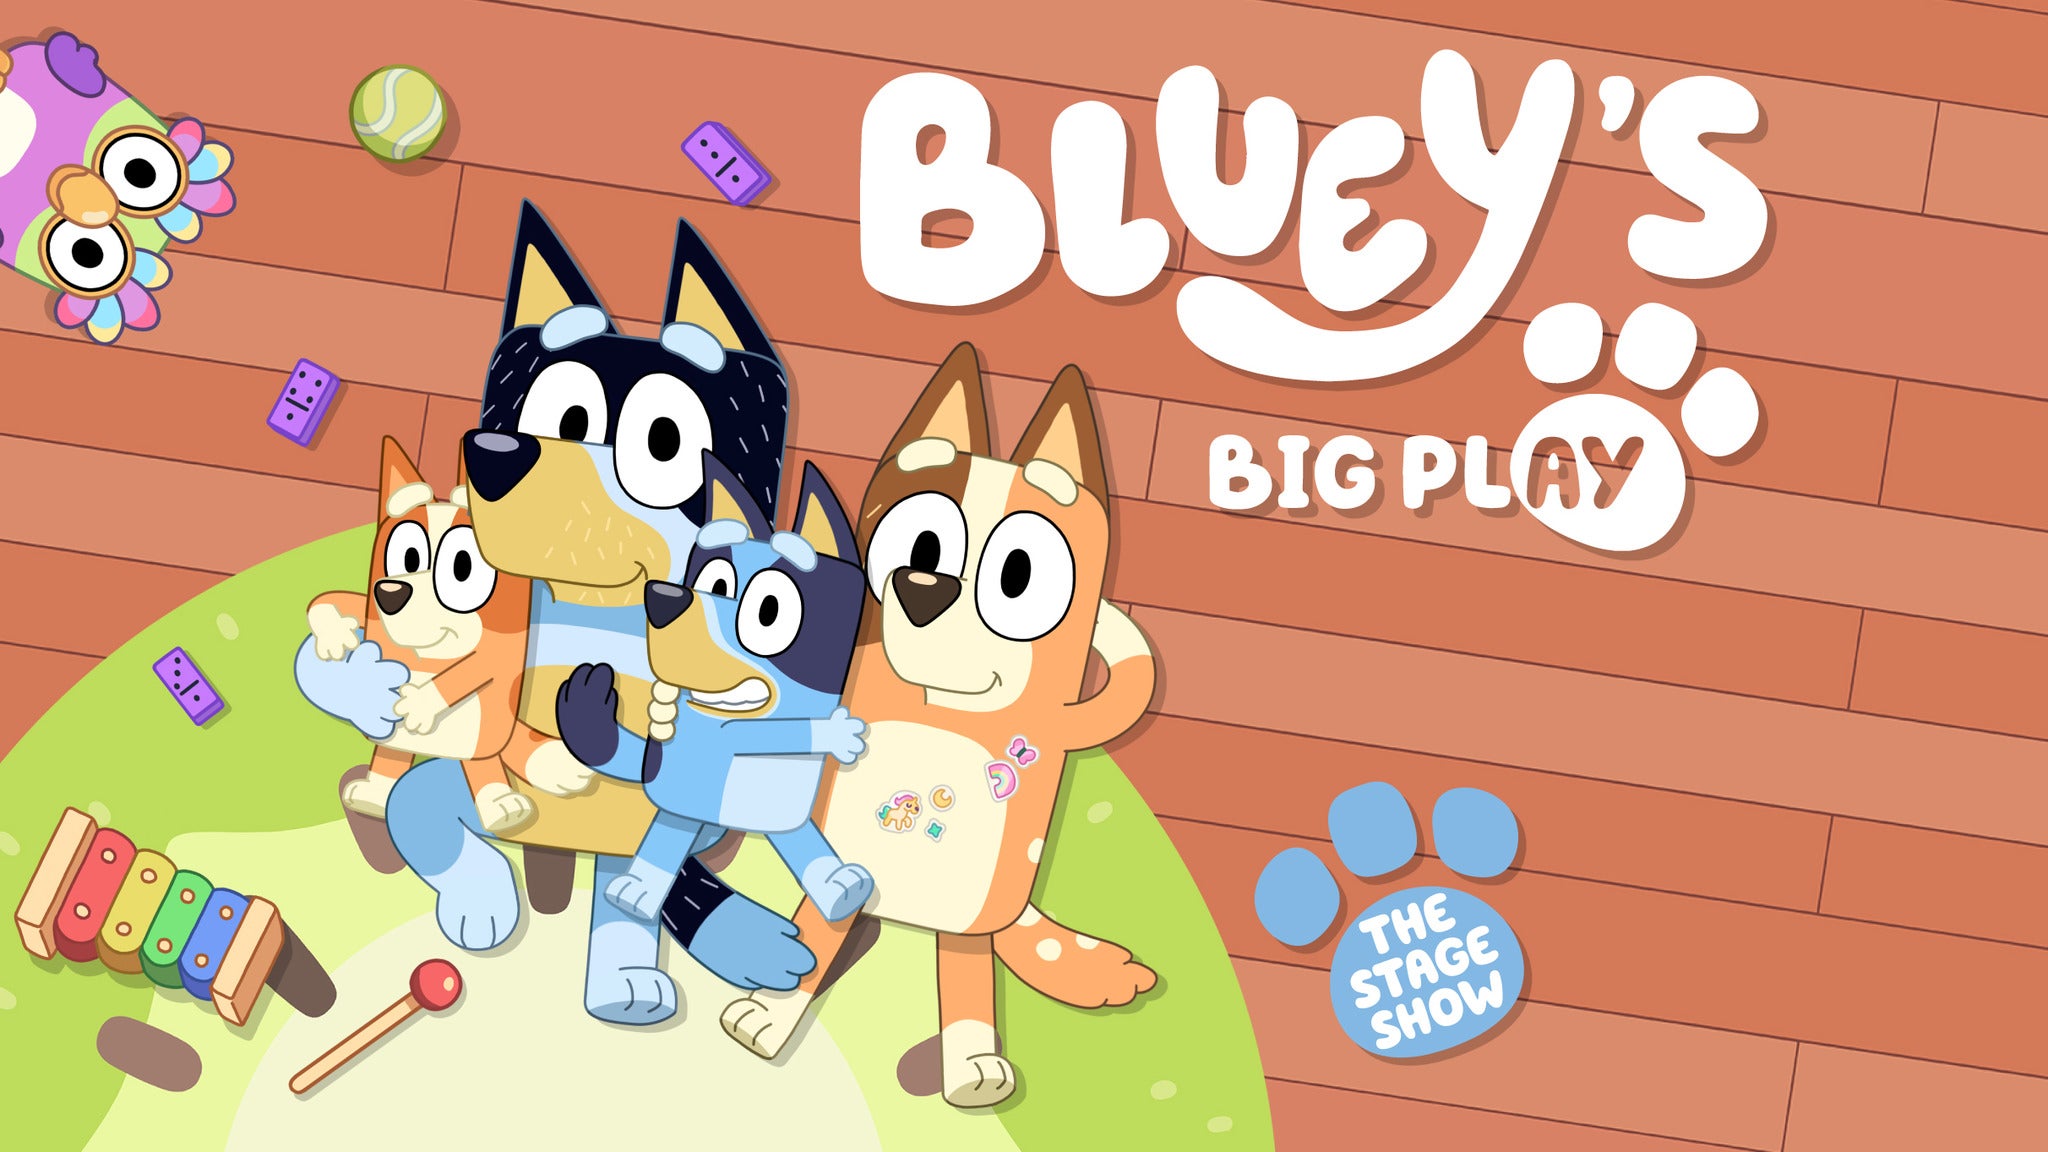 new presale c0de for Bluey's Big Play advanced tickets in Greensboro at Steven Tanger Center for the Performing Arts